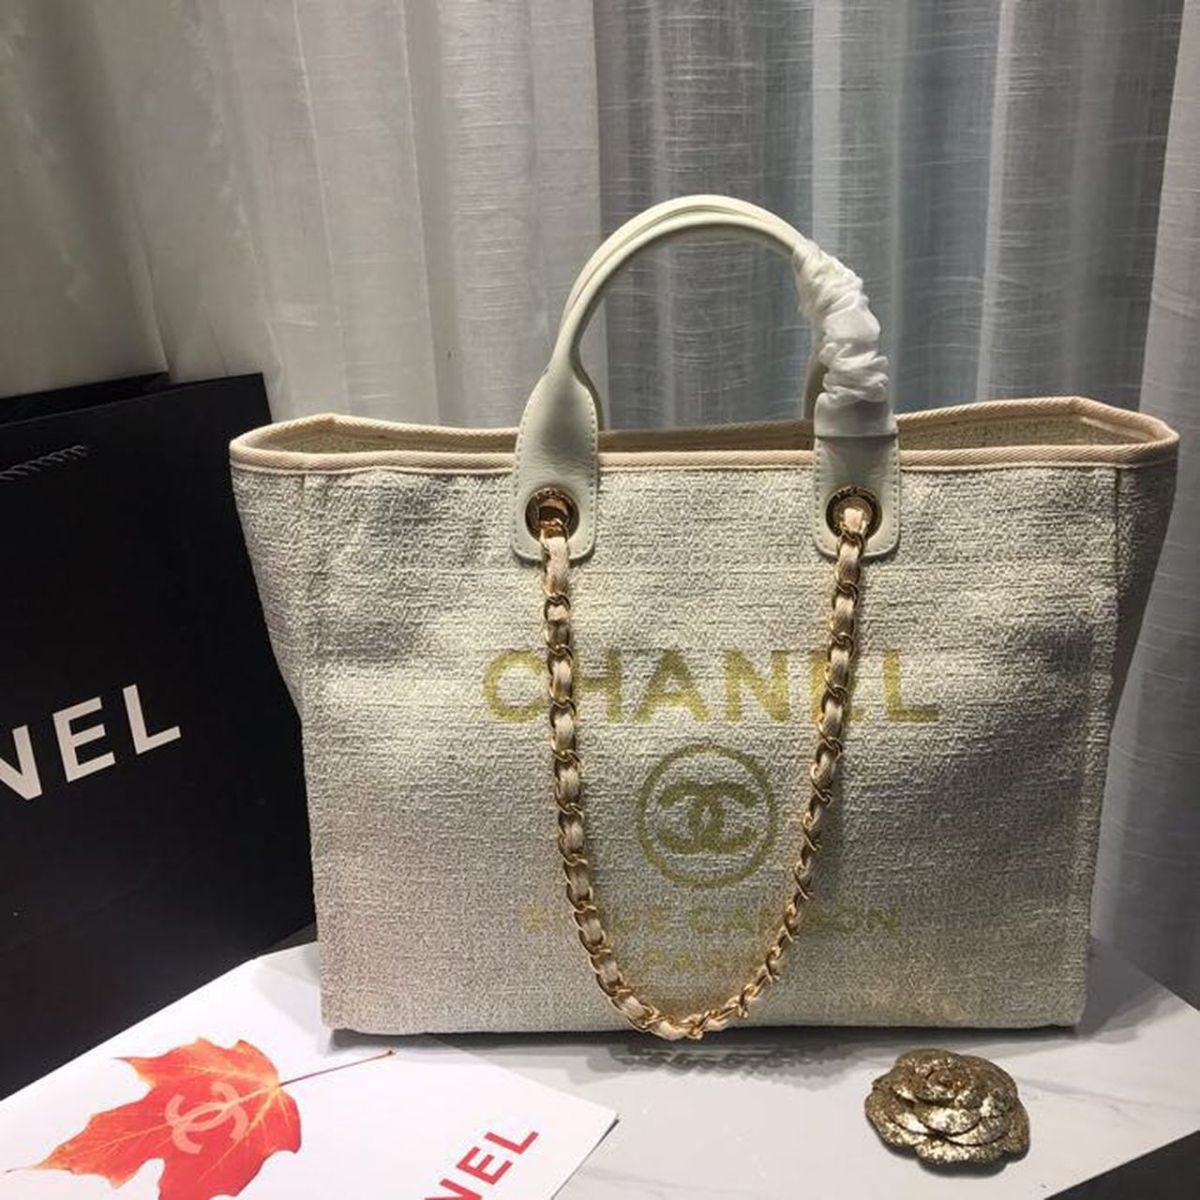 Tbshows Shop - CHANEL TEDDDI2 scarpe, Chanel Deauville Tote Tweed Canvas Bag  Fall/Winter Collection, Beige/Cream/Gold/Multi For Women 15in/38cm - 2799